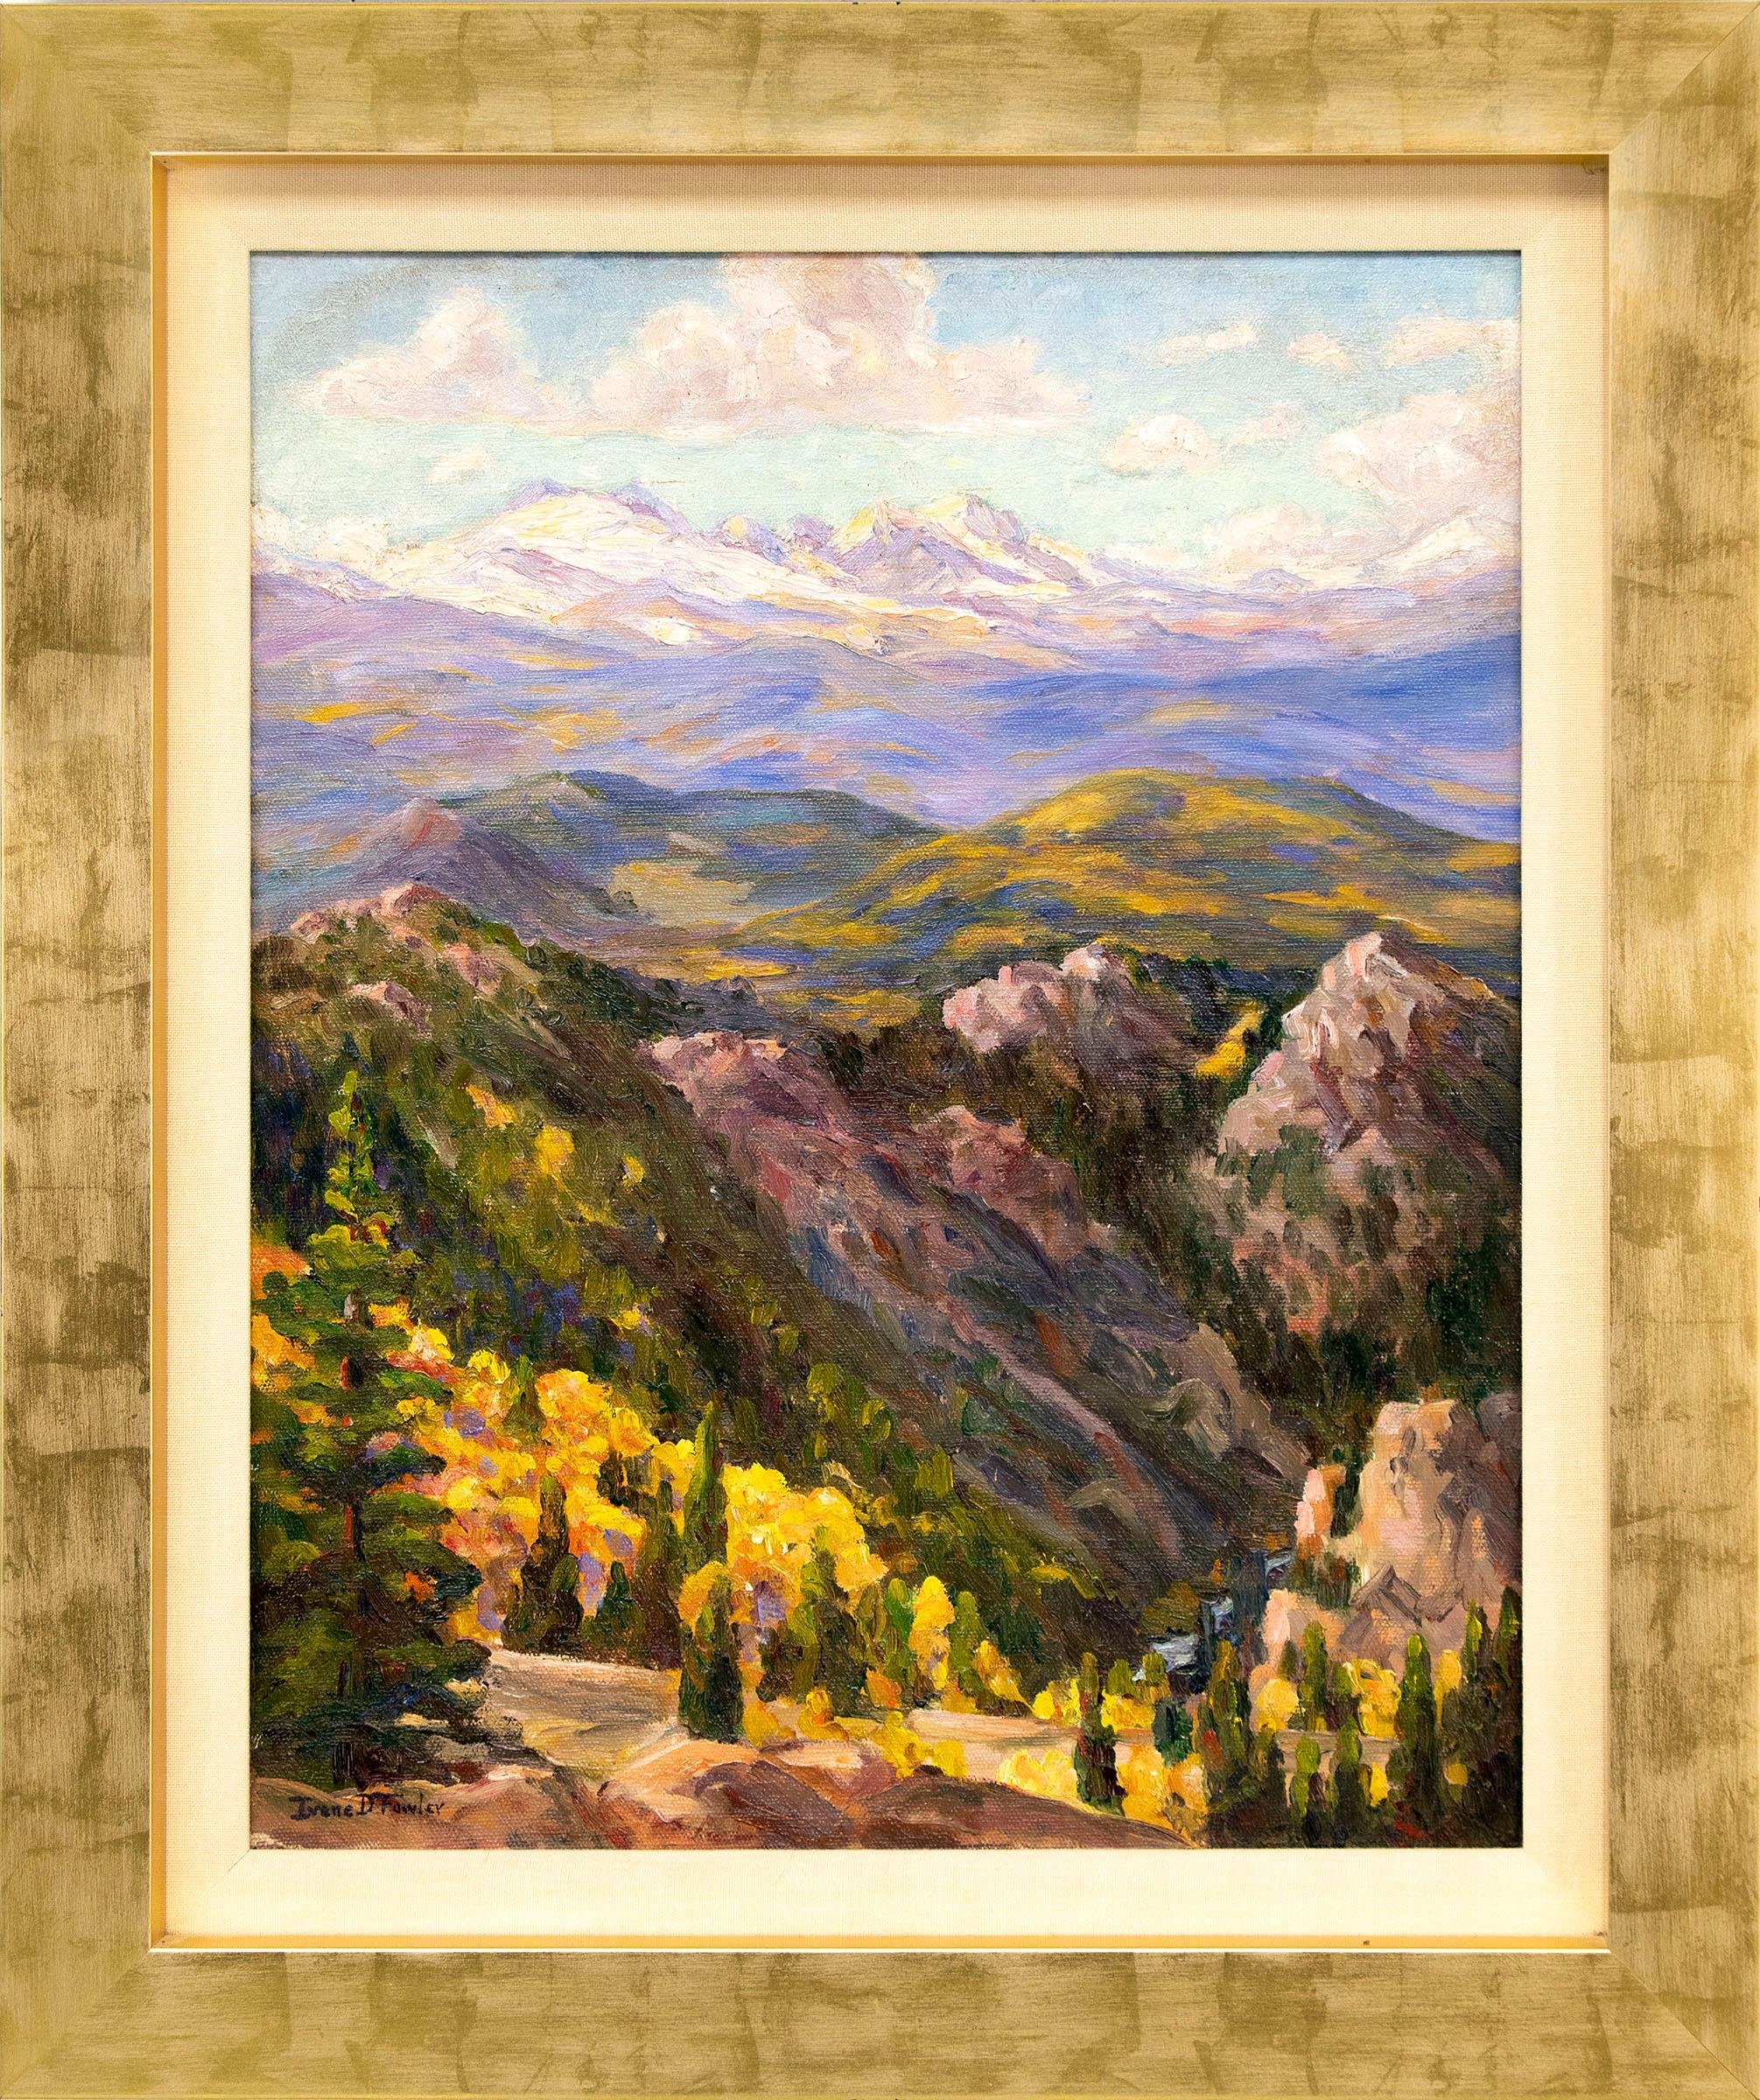 Boulder Canyon, Framed 1940s Colorado Mountain Landscape in Autumn with Aspens - Painting by Irene Fowler